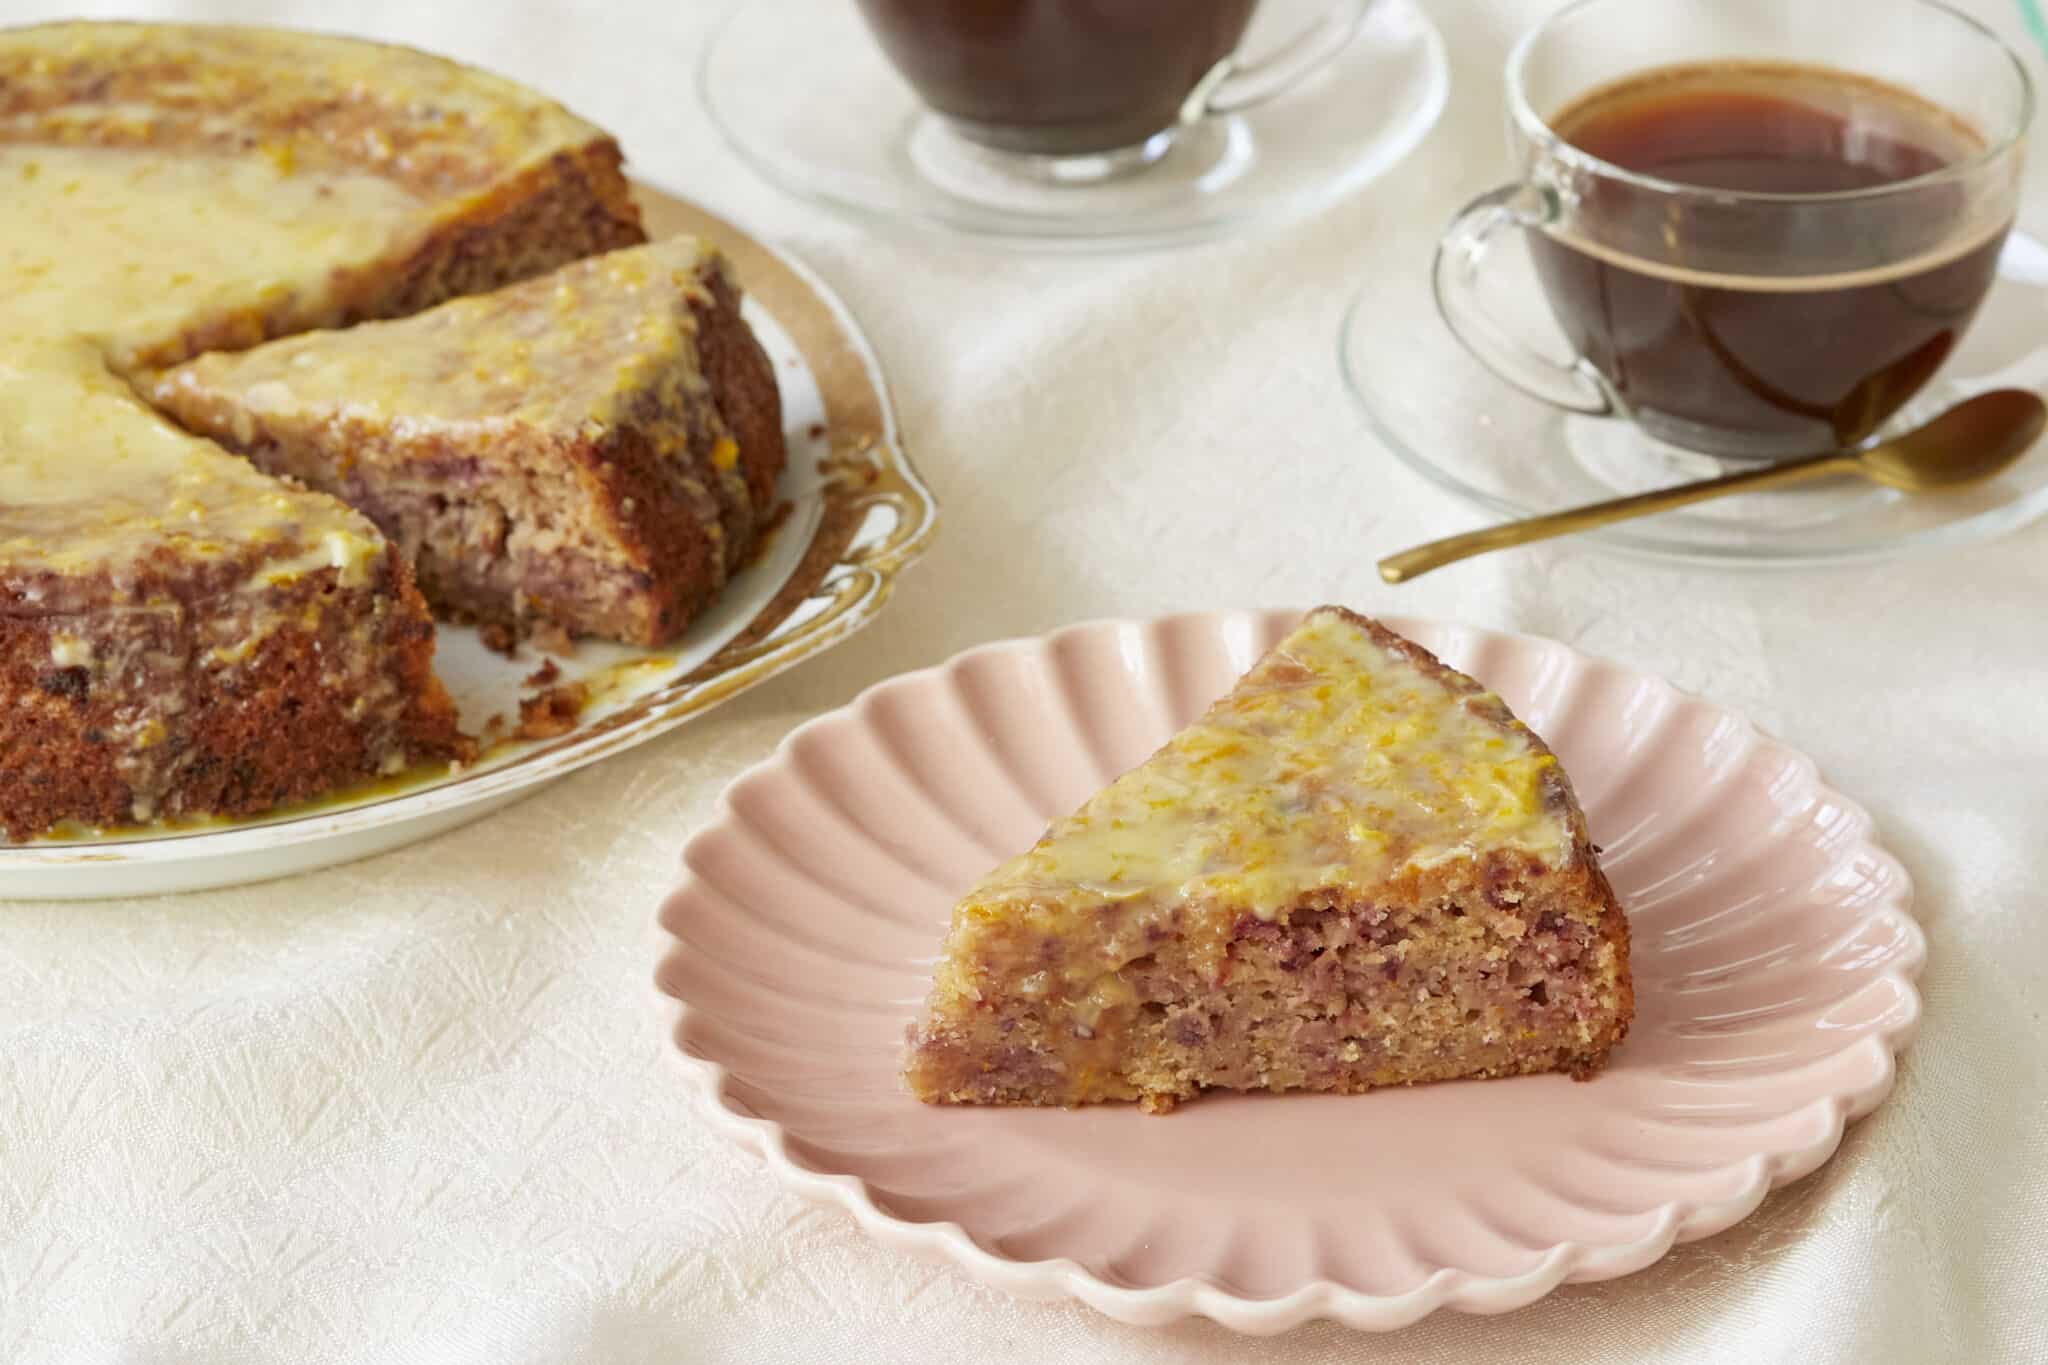 Cranberry Orange Cake is served on a golden-edge platter with two cups of coffee. The slice in front is served on a pink dessert plate, showing the moist interior loaded with cranberries bits and spices. It's covered with glossy lemon glaze which has lemon zest in.